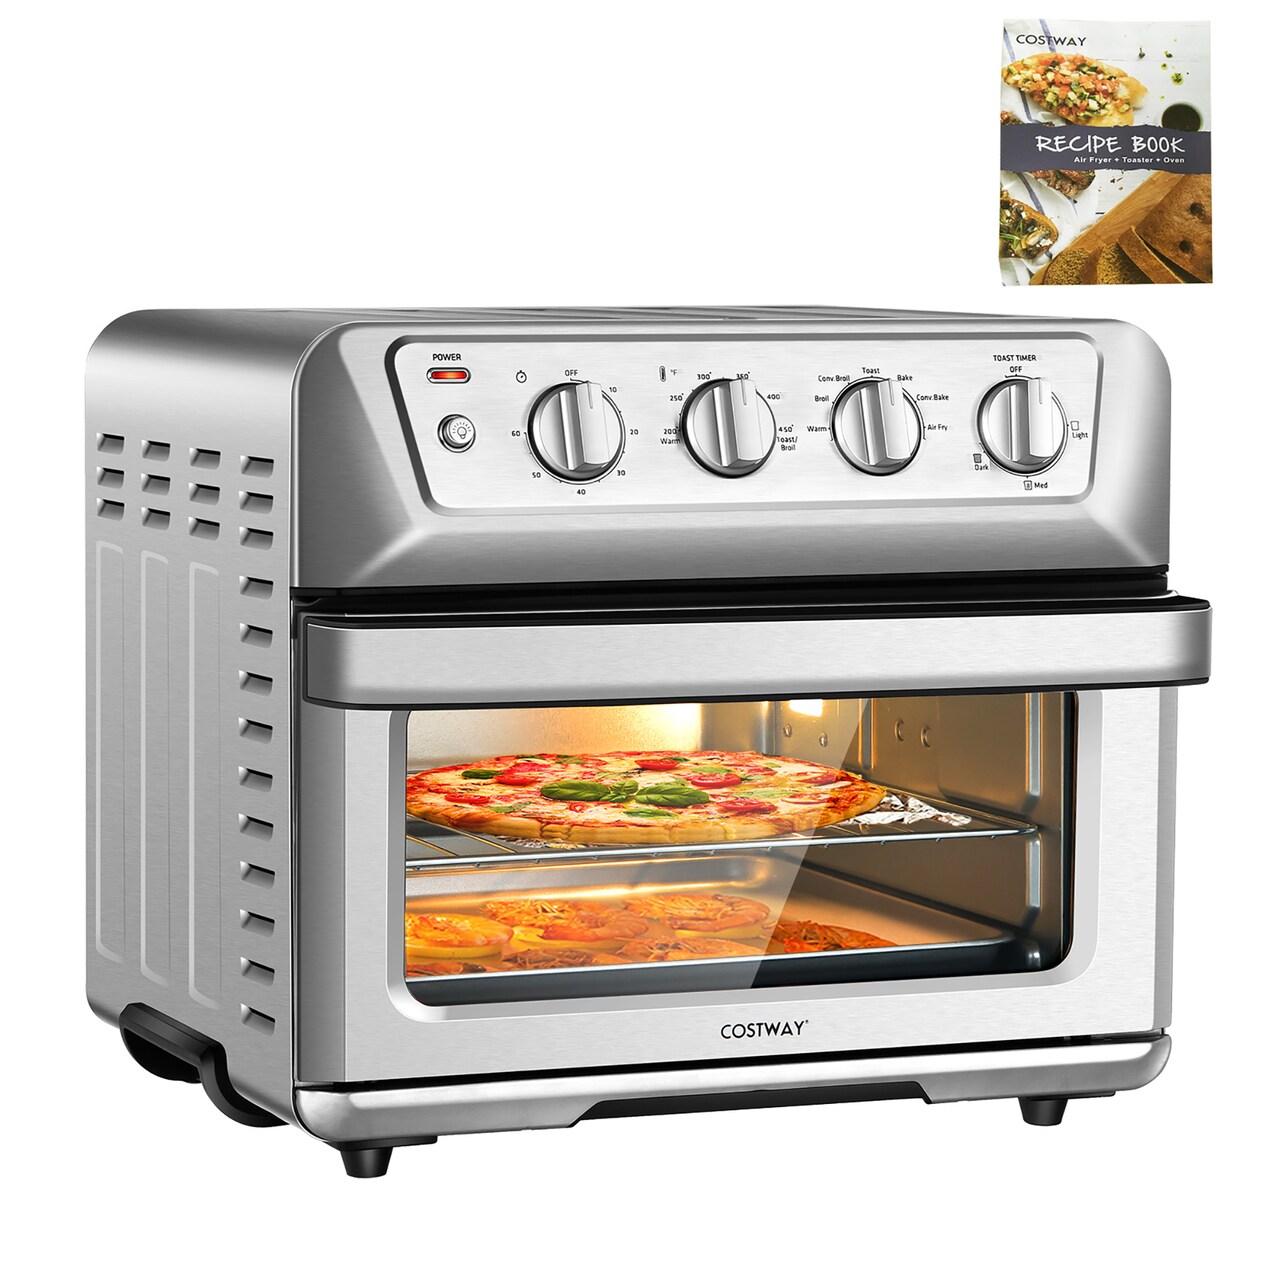 Costway 21.5QT Air Fryer Toaster Oven 1800W Countertop Convection